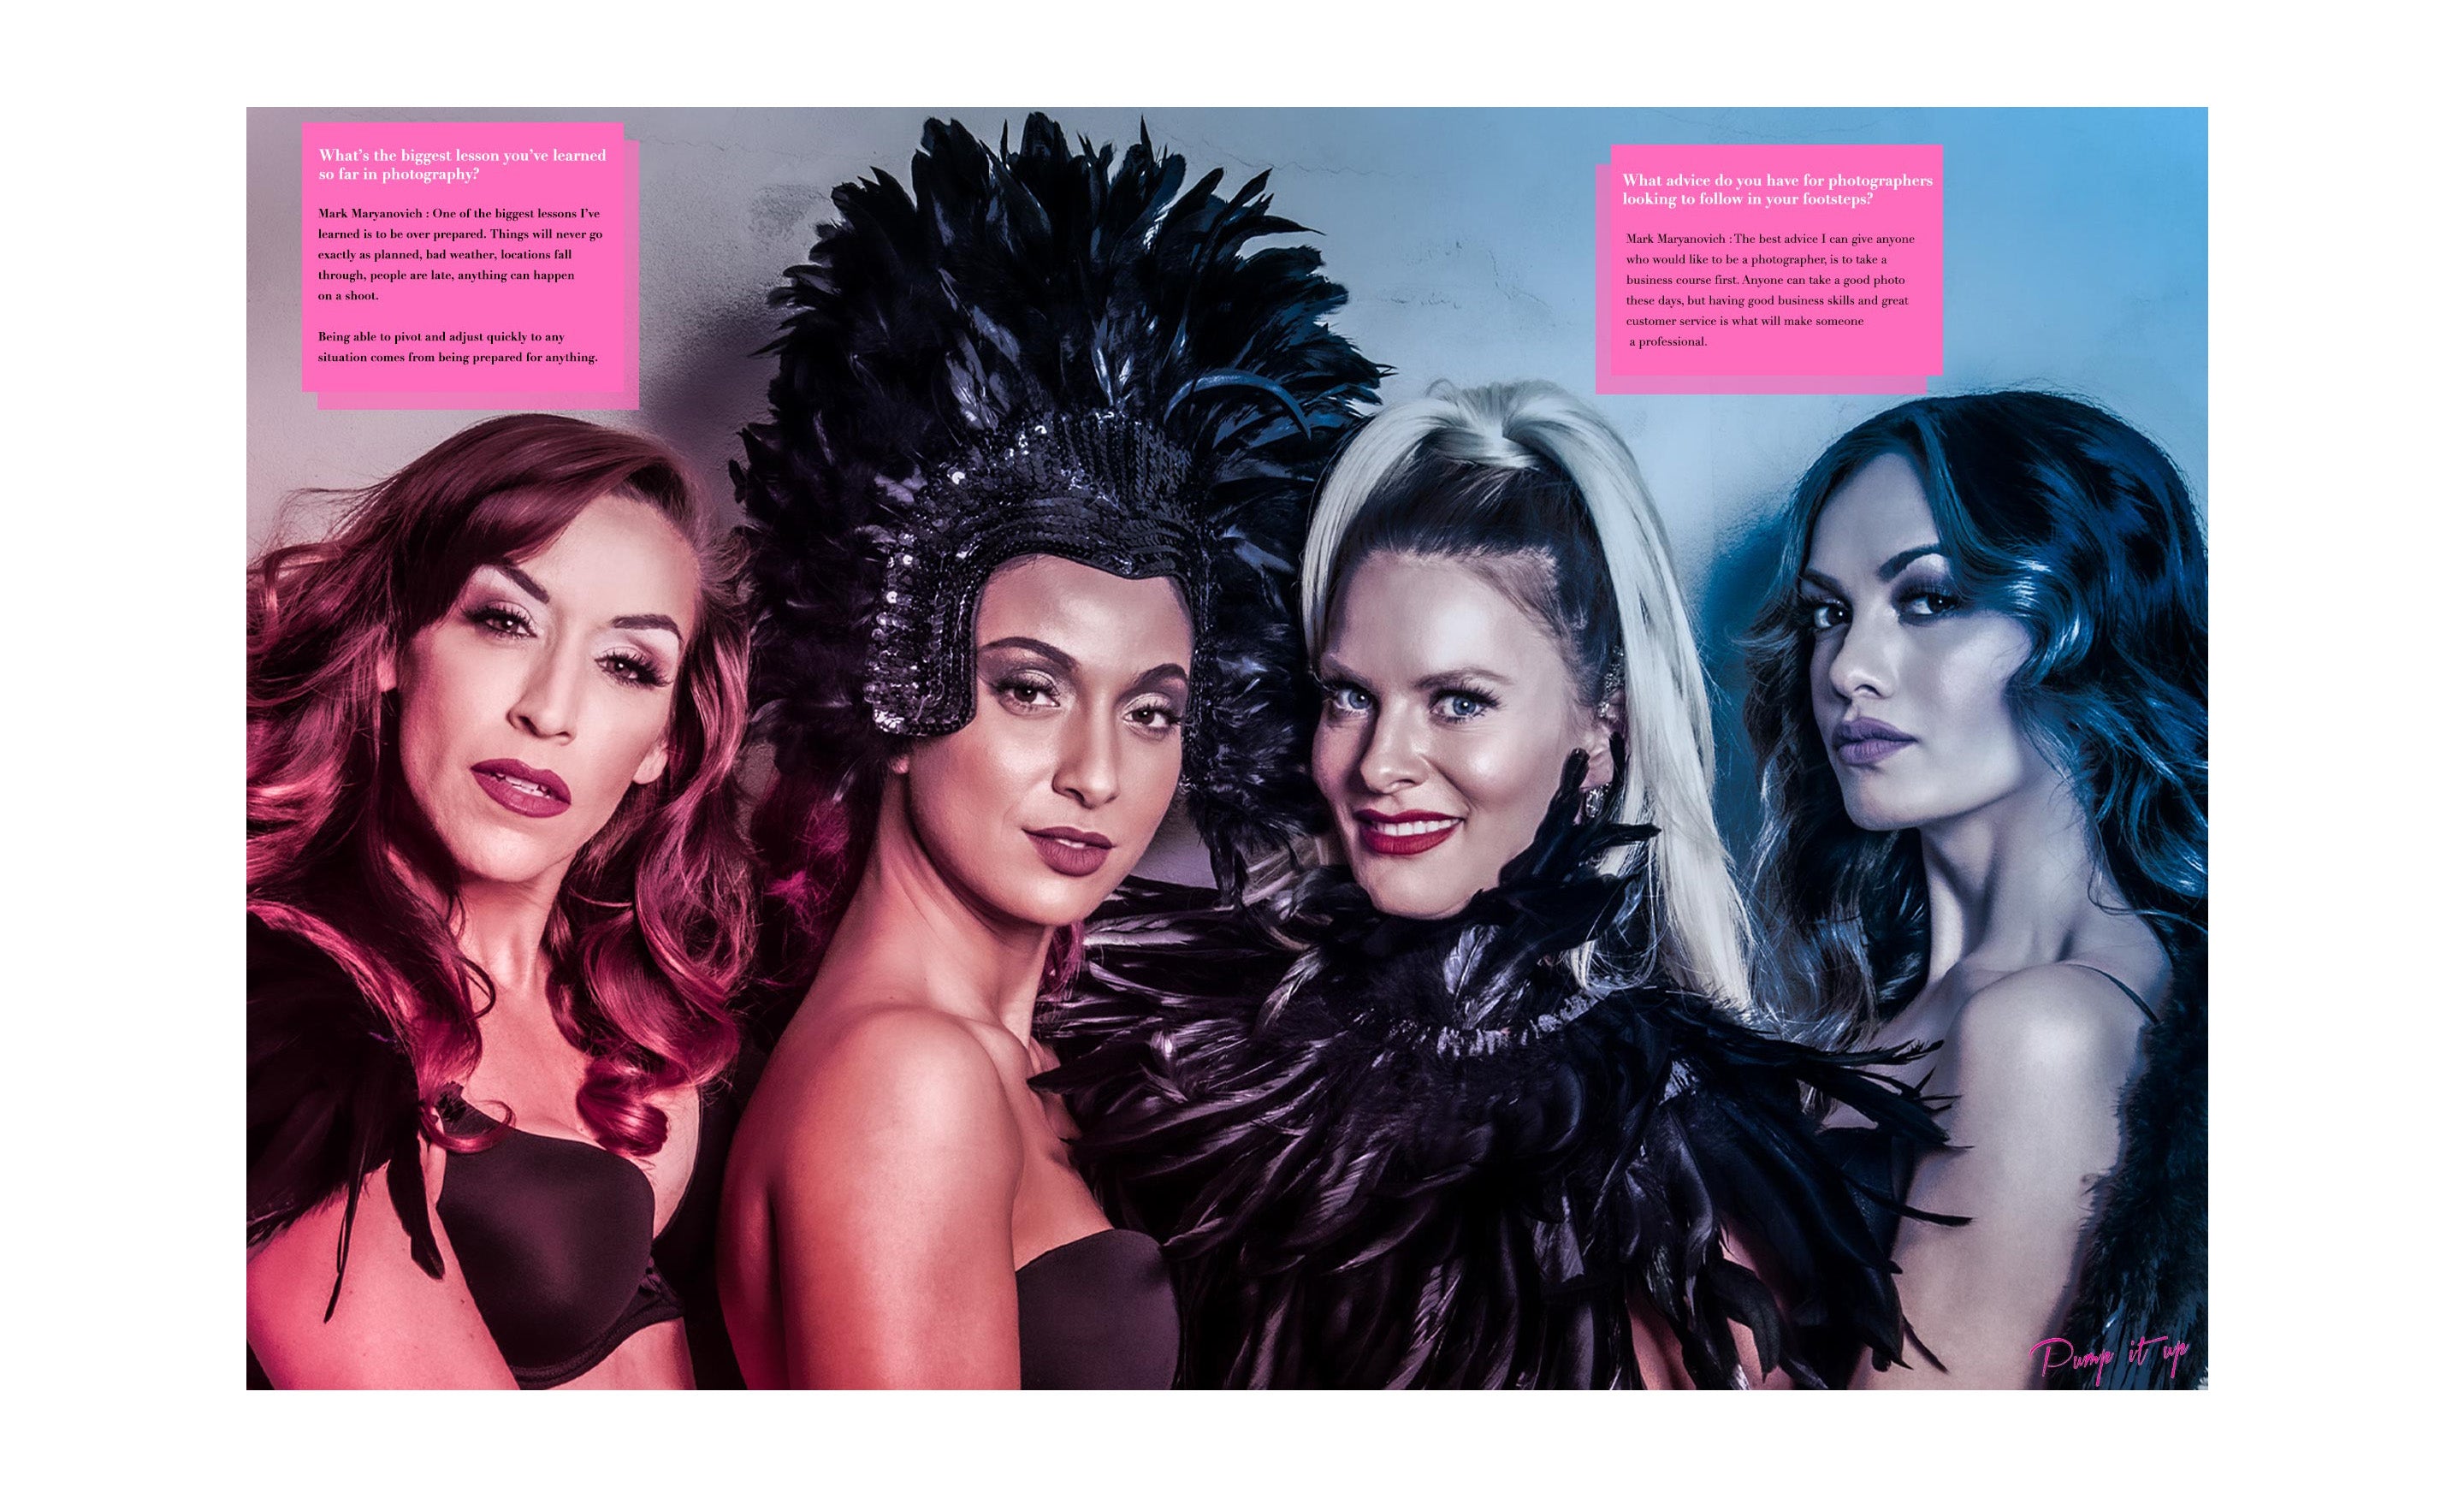 Los Angeles portrait photographer Mark Maryanovich Pump It Up Magazine Interview page 4 image of four female musicians one wearing feathered head dress with text laid in two pink boxes above their heads